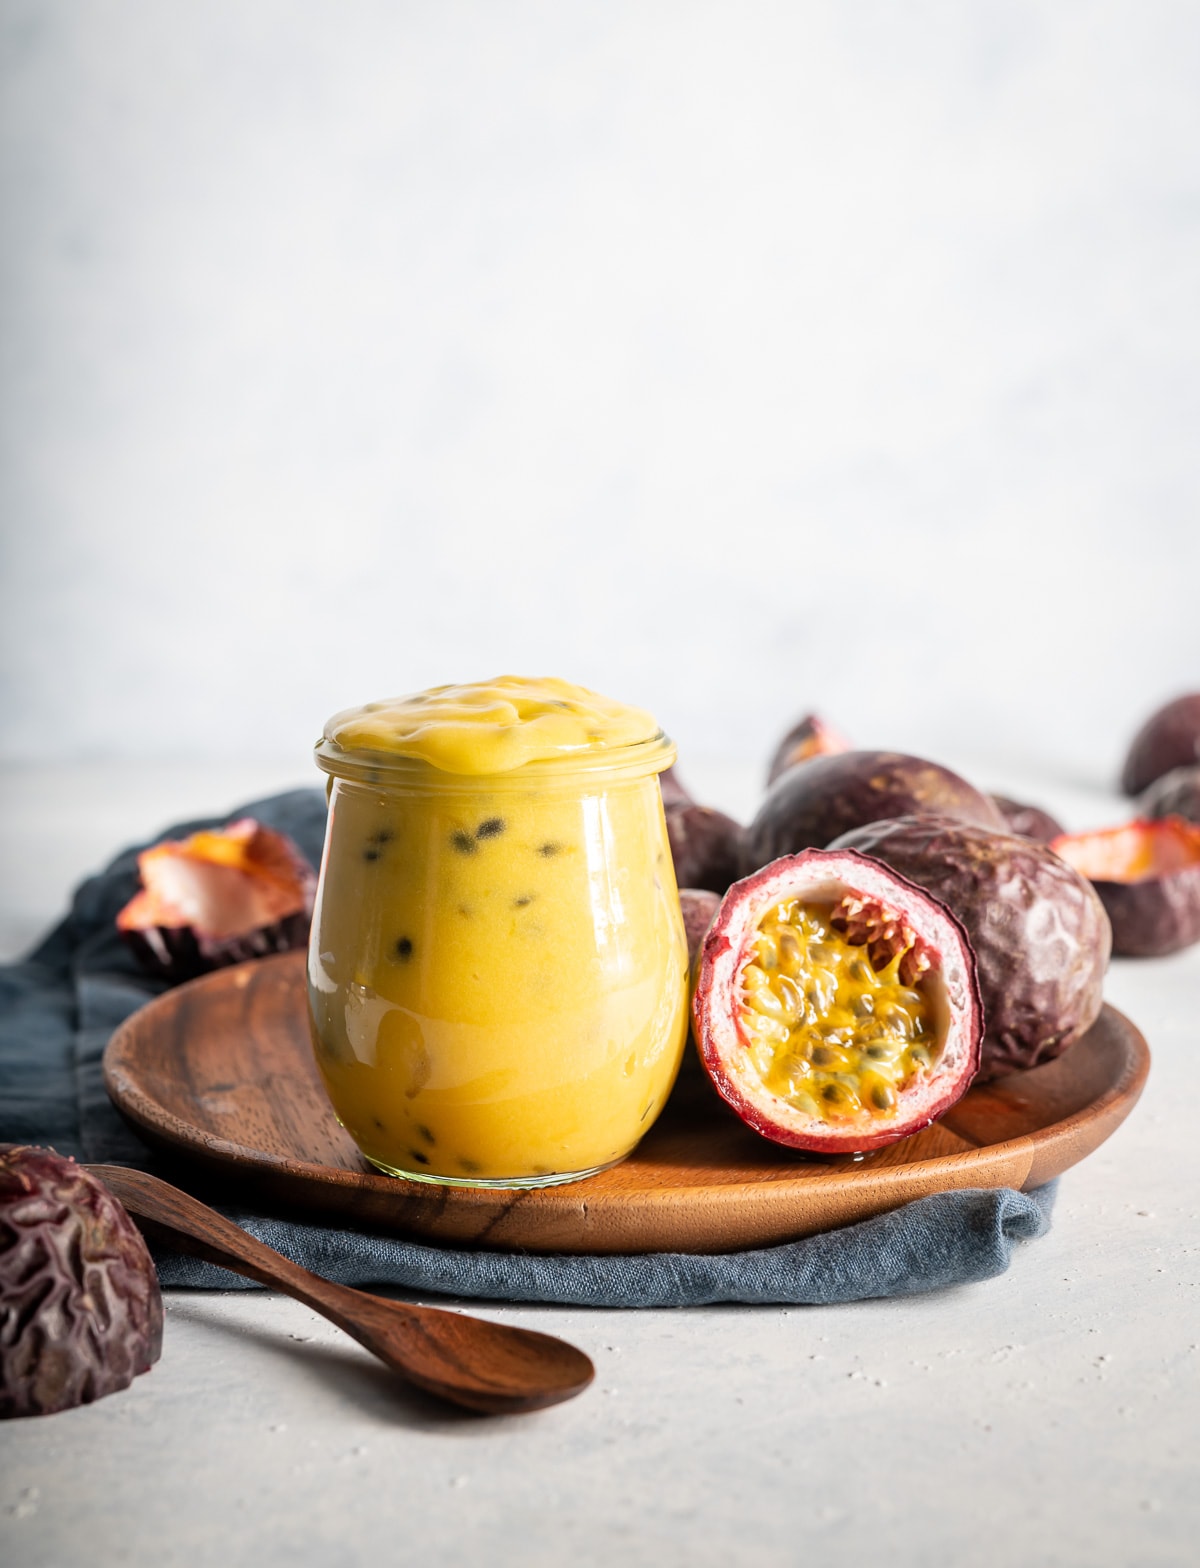 yellow passion fruit curd in a jar with fresh passion fruits cut in half brown plate blue napkin